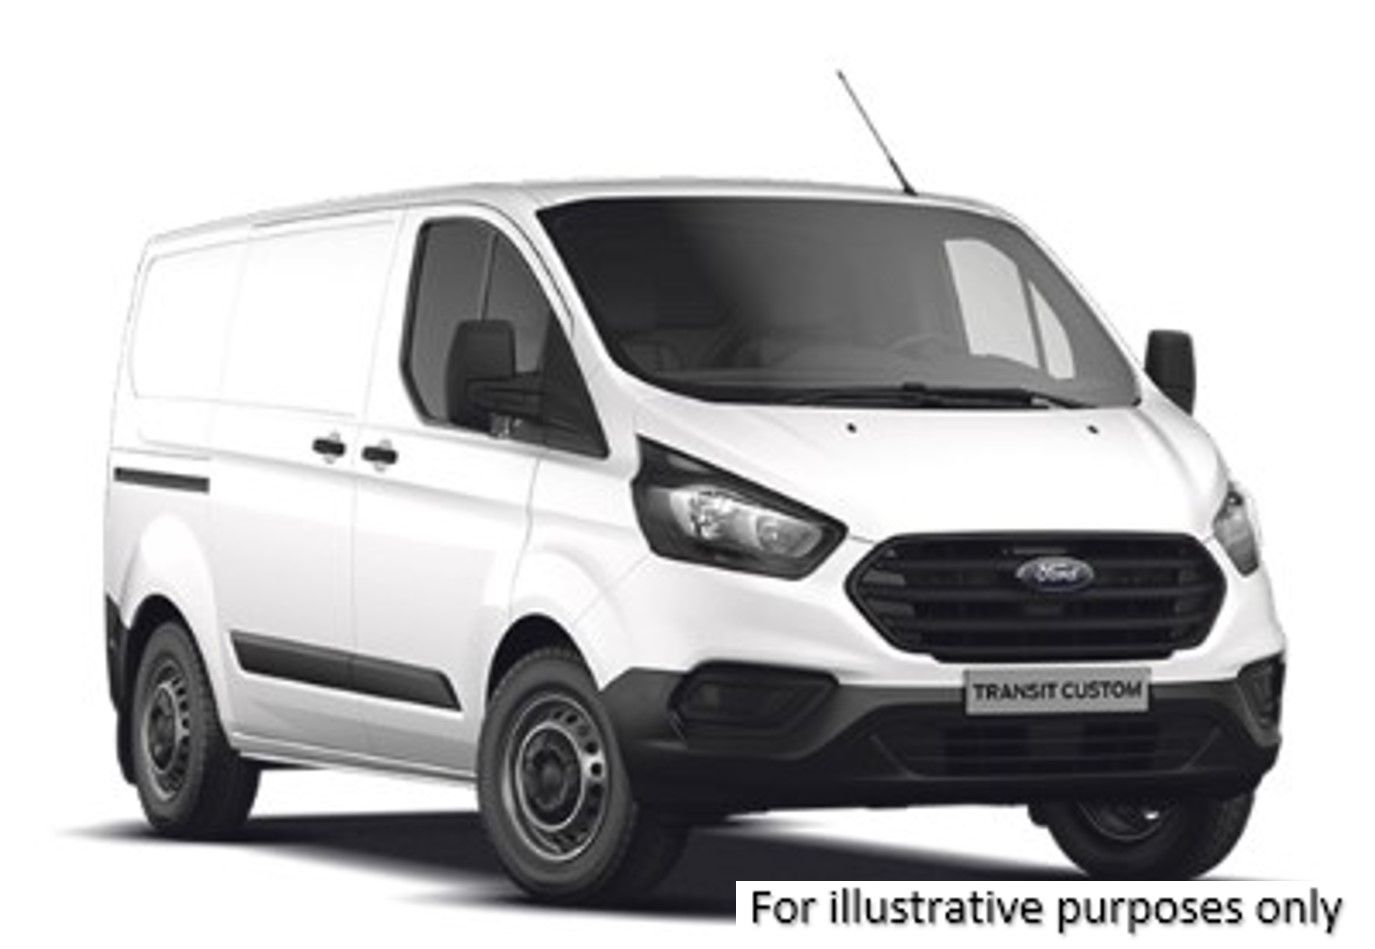 2019 Ford Transit Custom 2.0 Tdci 105Ps Low Roof Van (FH19WSW)